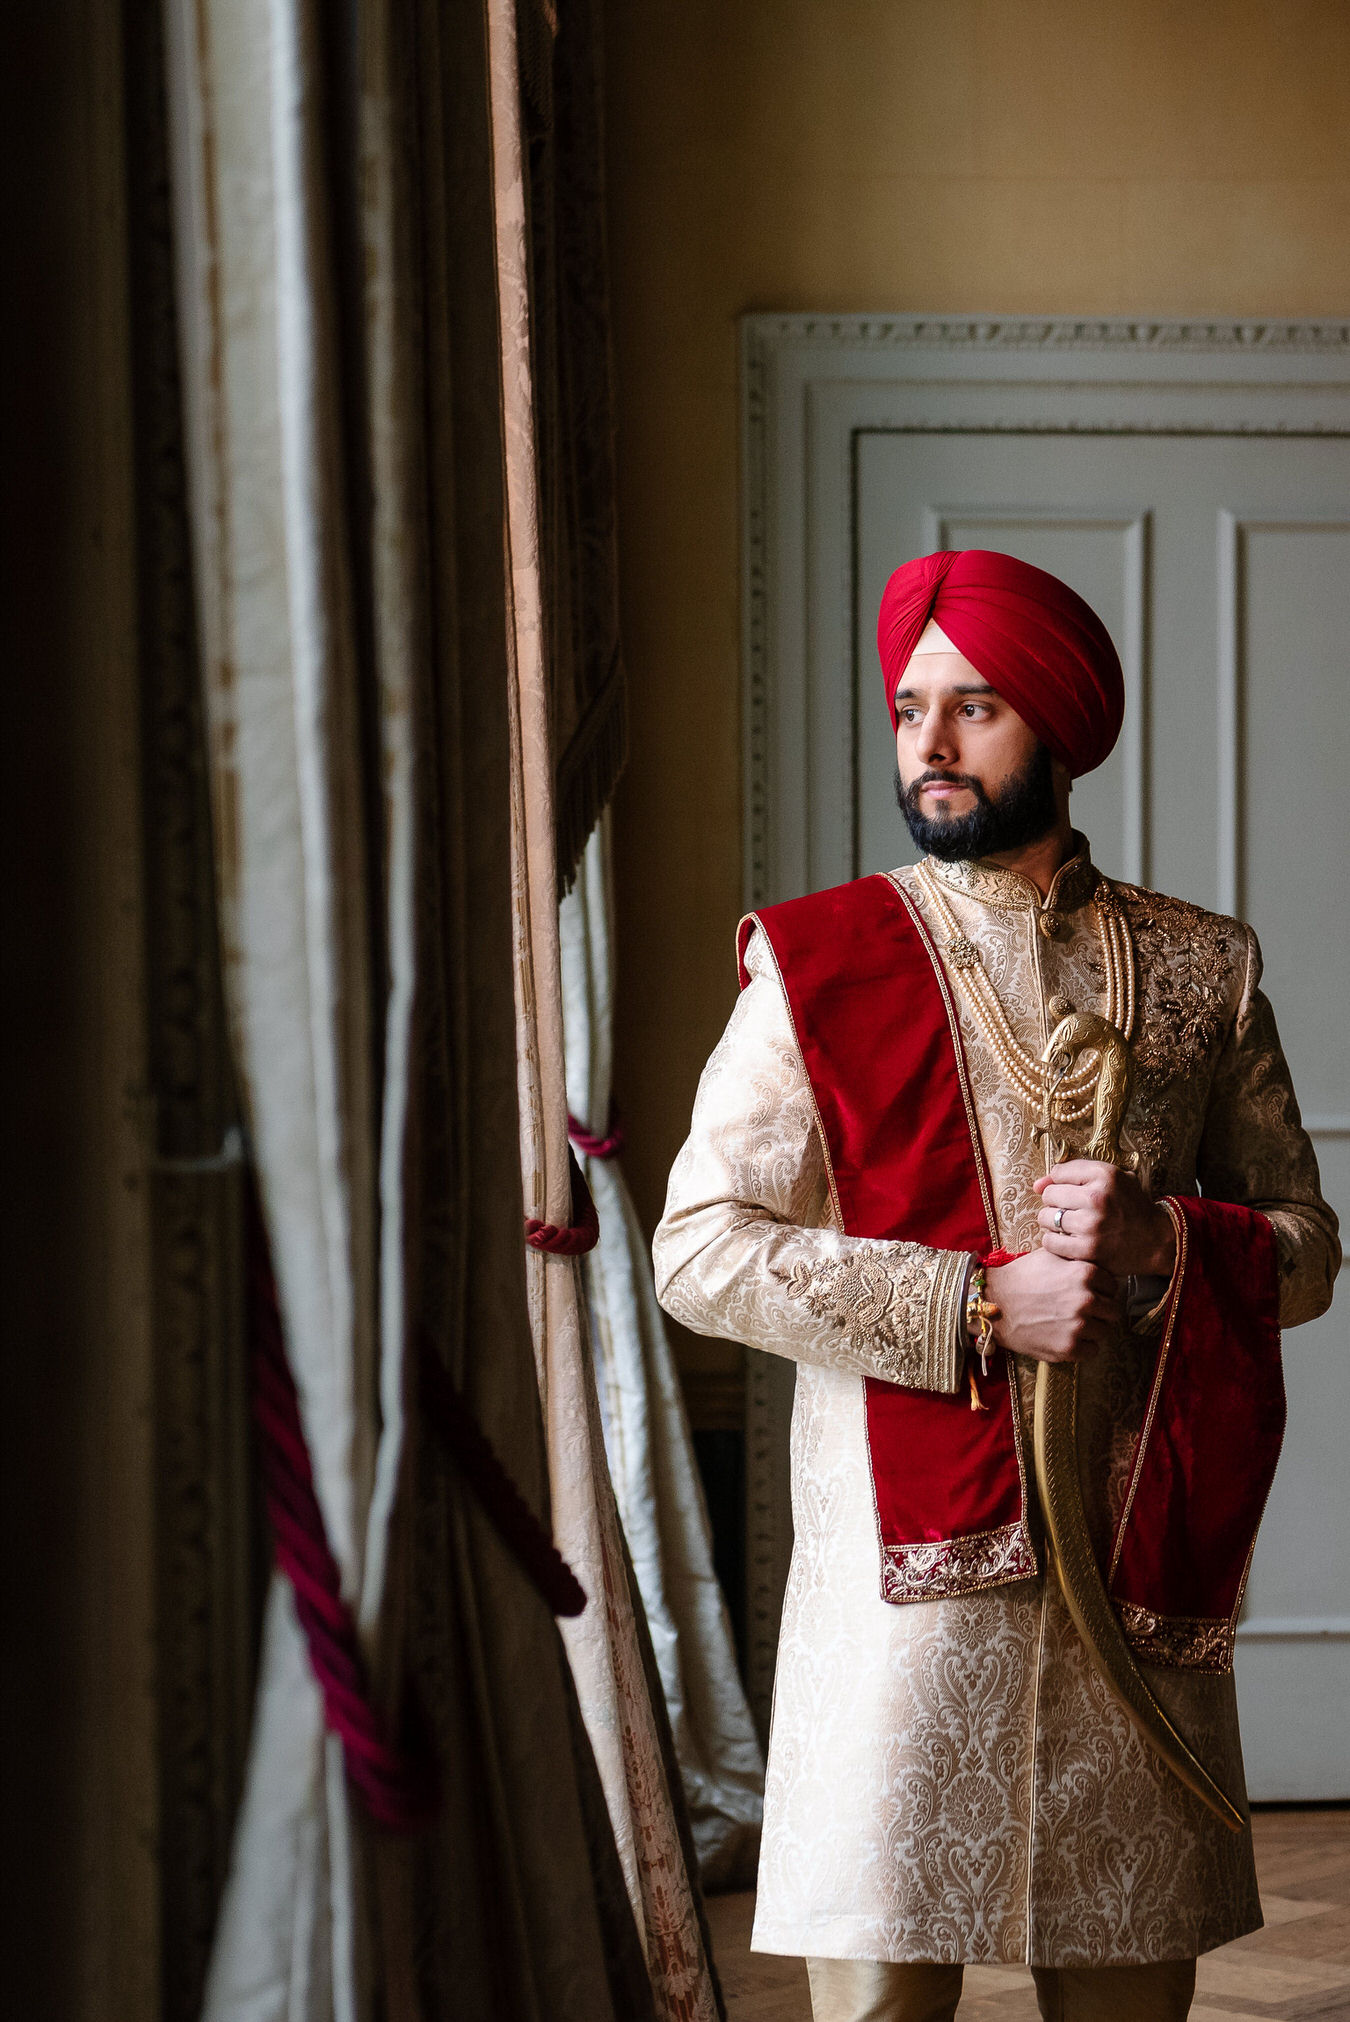 Sikh wedding groom with kirpan in his hands and a red turban on the head looking at his right.